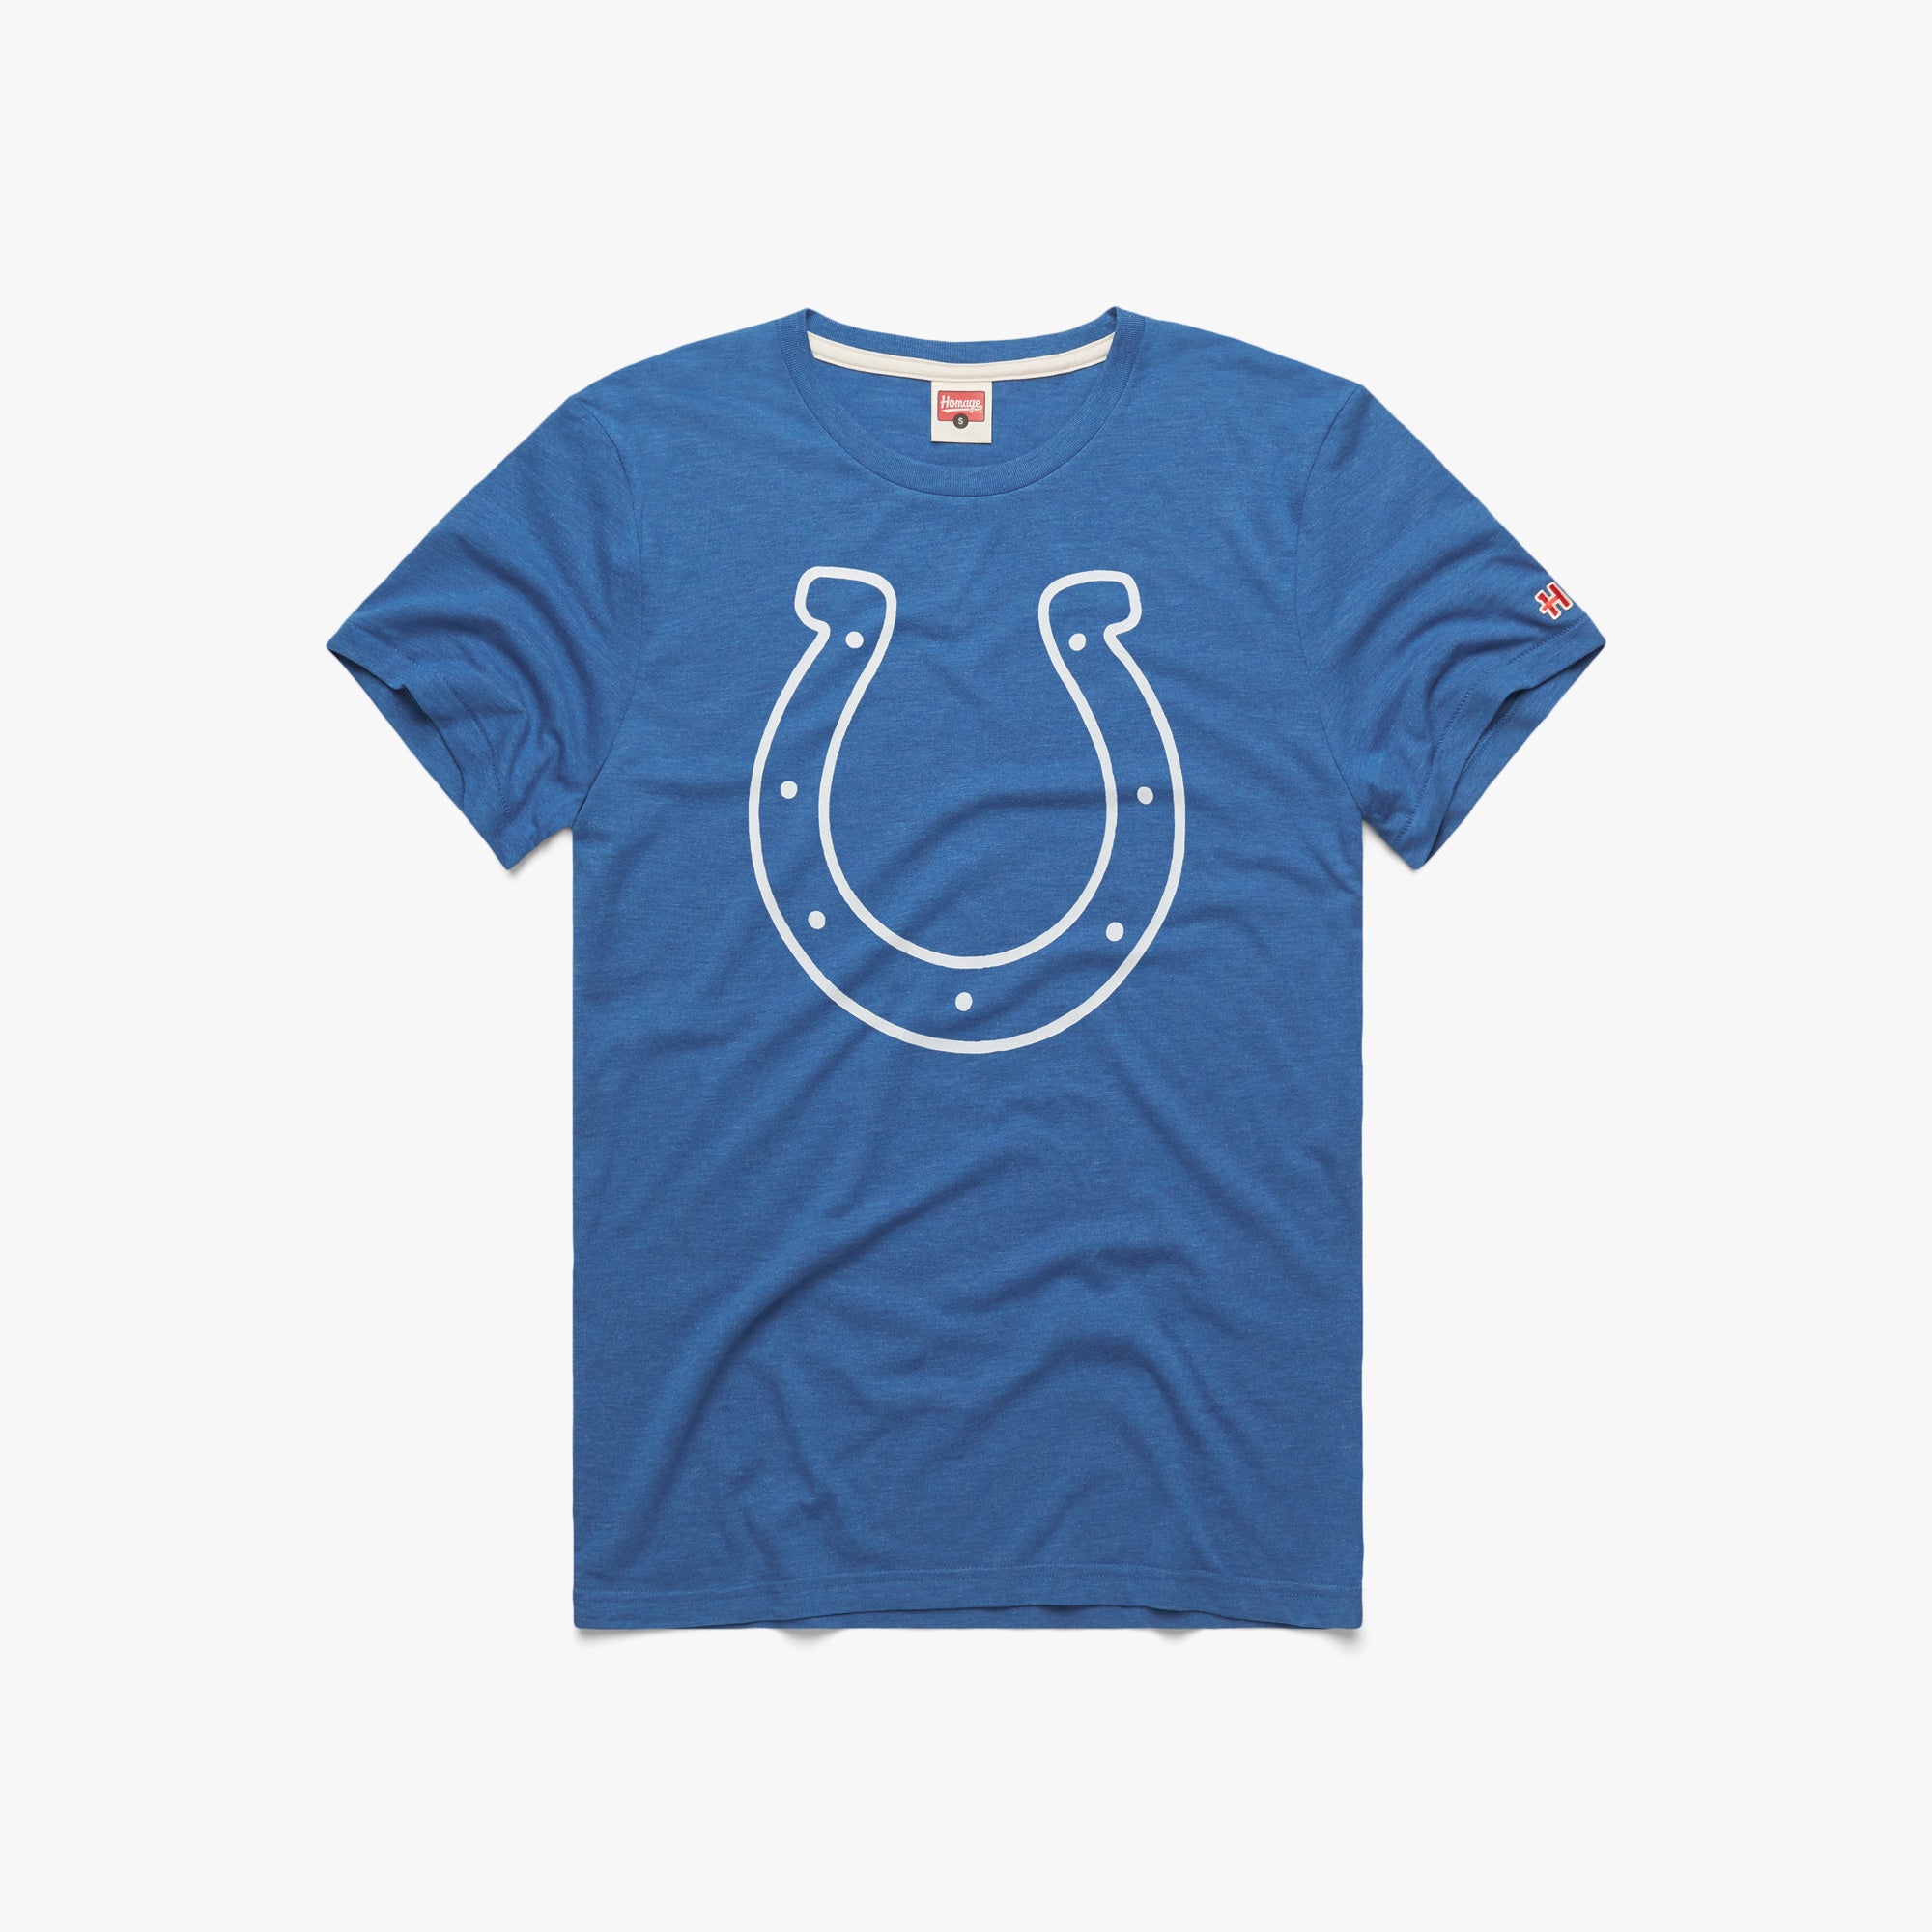 Indianapolis Colts '04